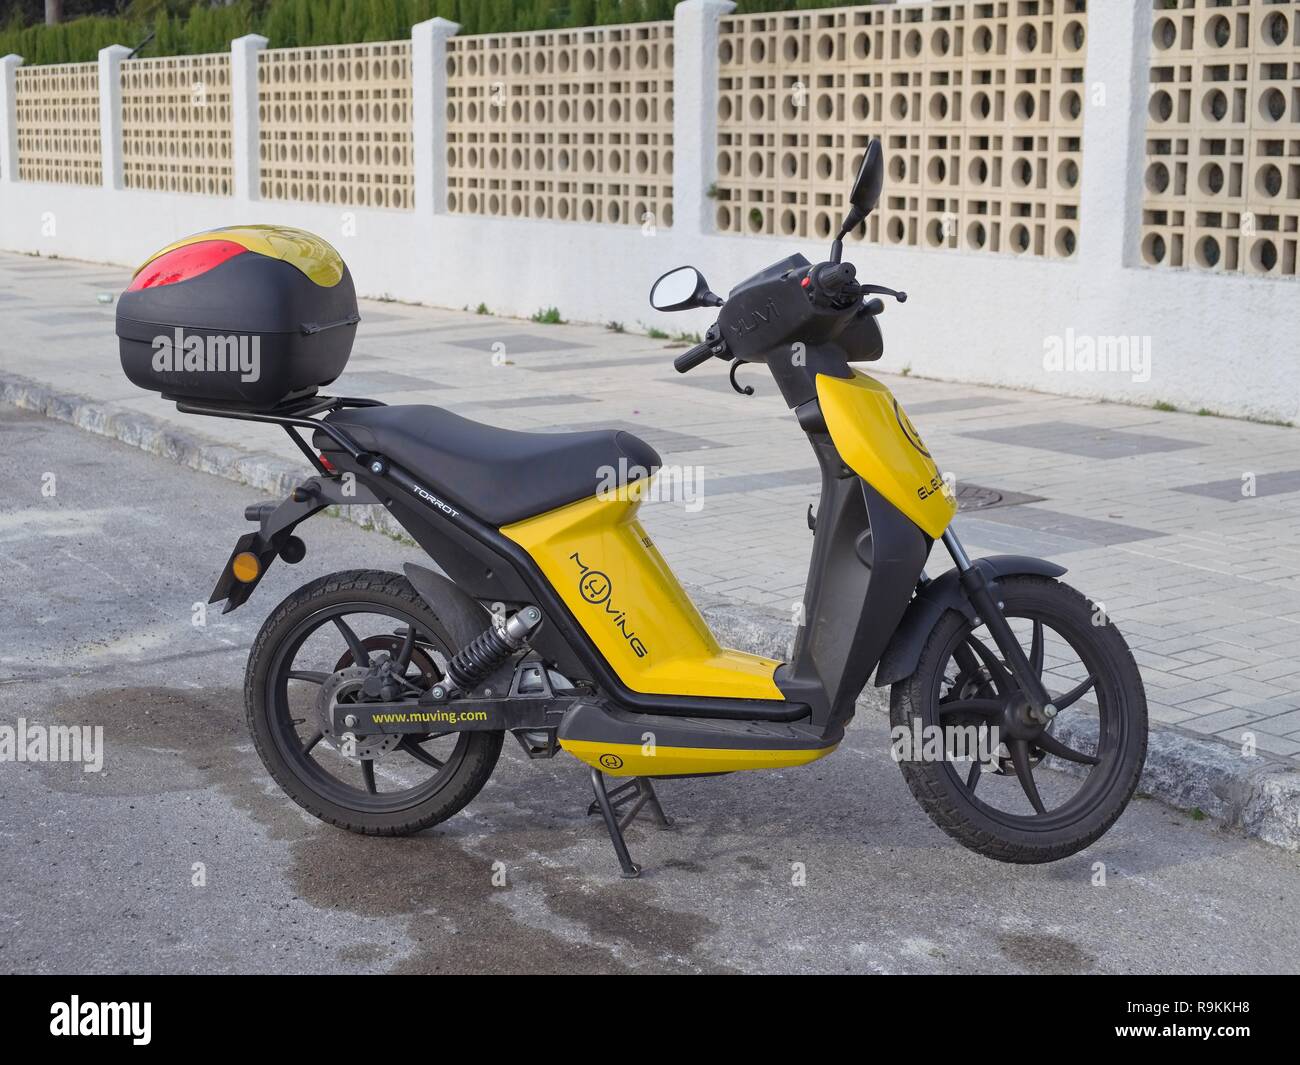 Spanish Moped High Resolution Stock Photography and Images - Alamy